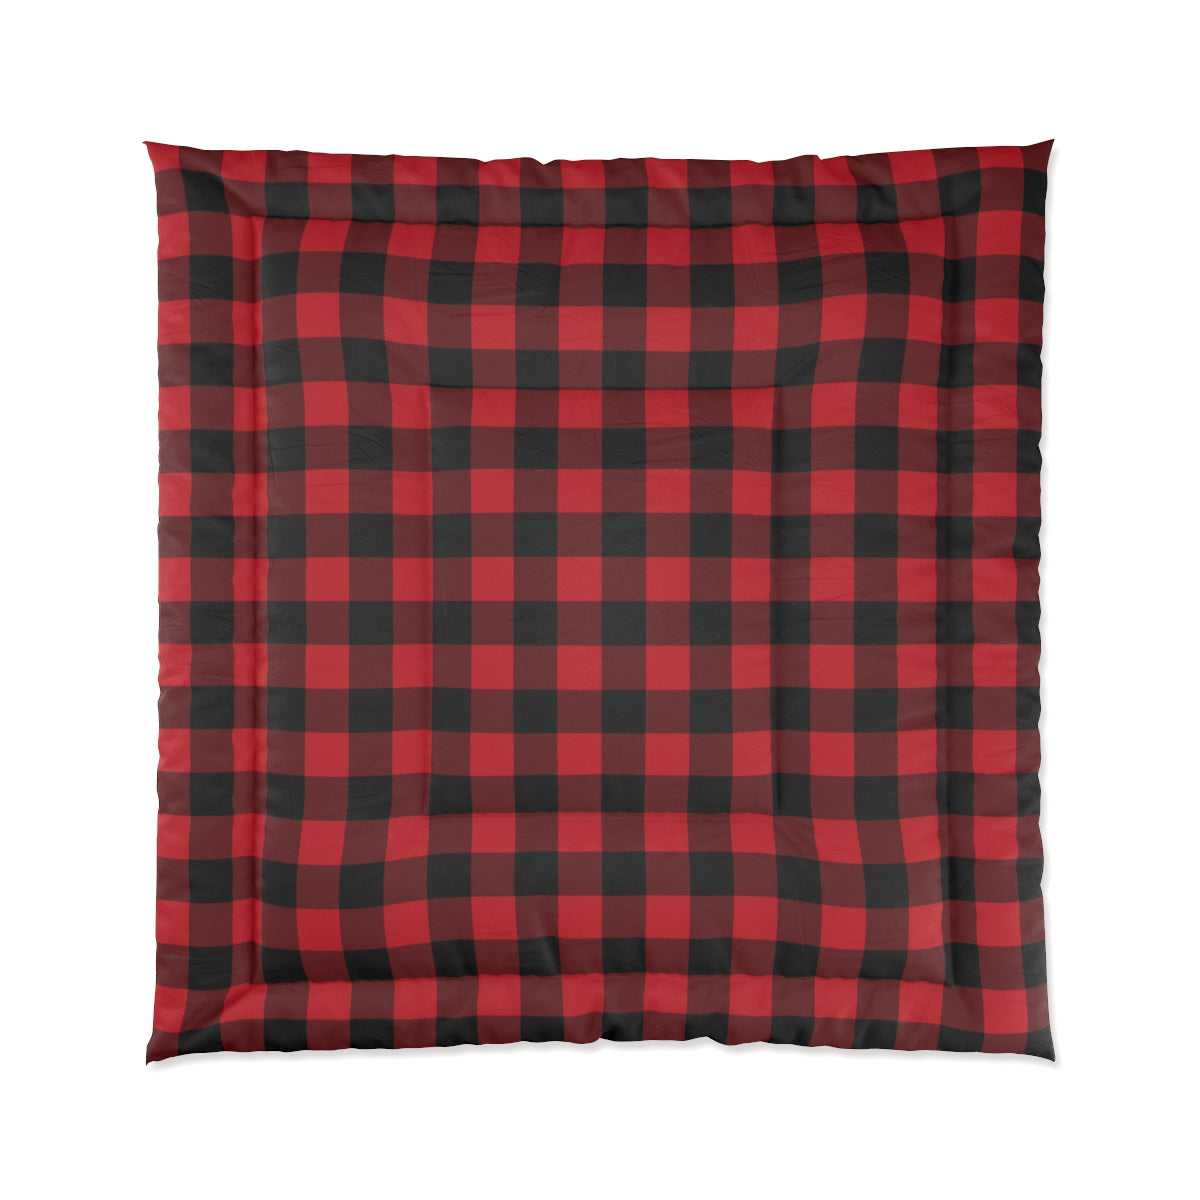 Red Buffalo Plaid Bed Comforter, Black Check King Queen Twin Single Full Size Cool Luxury Quilted Blanket Duvet Bedding Bedroom Starcove Fashion